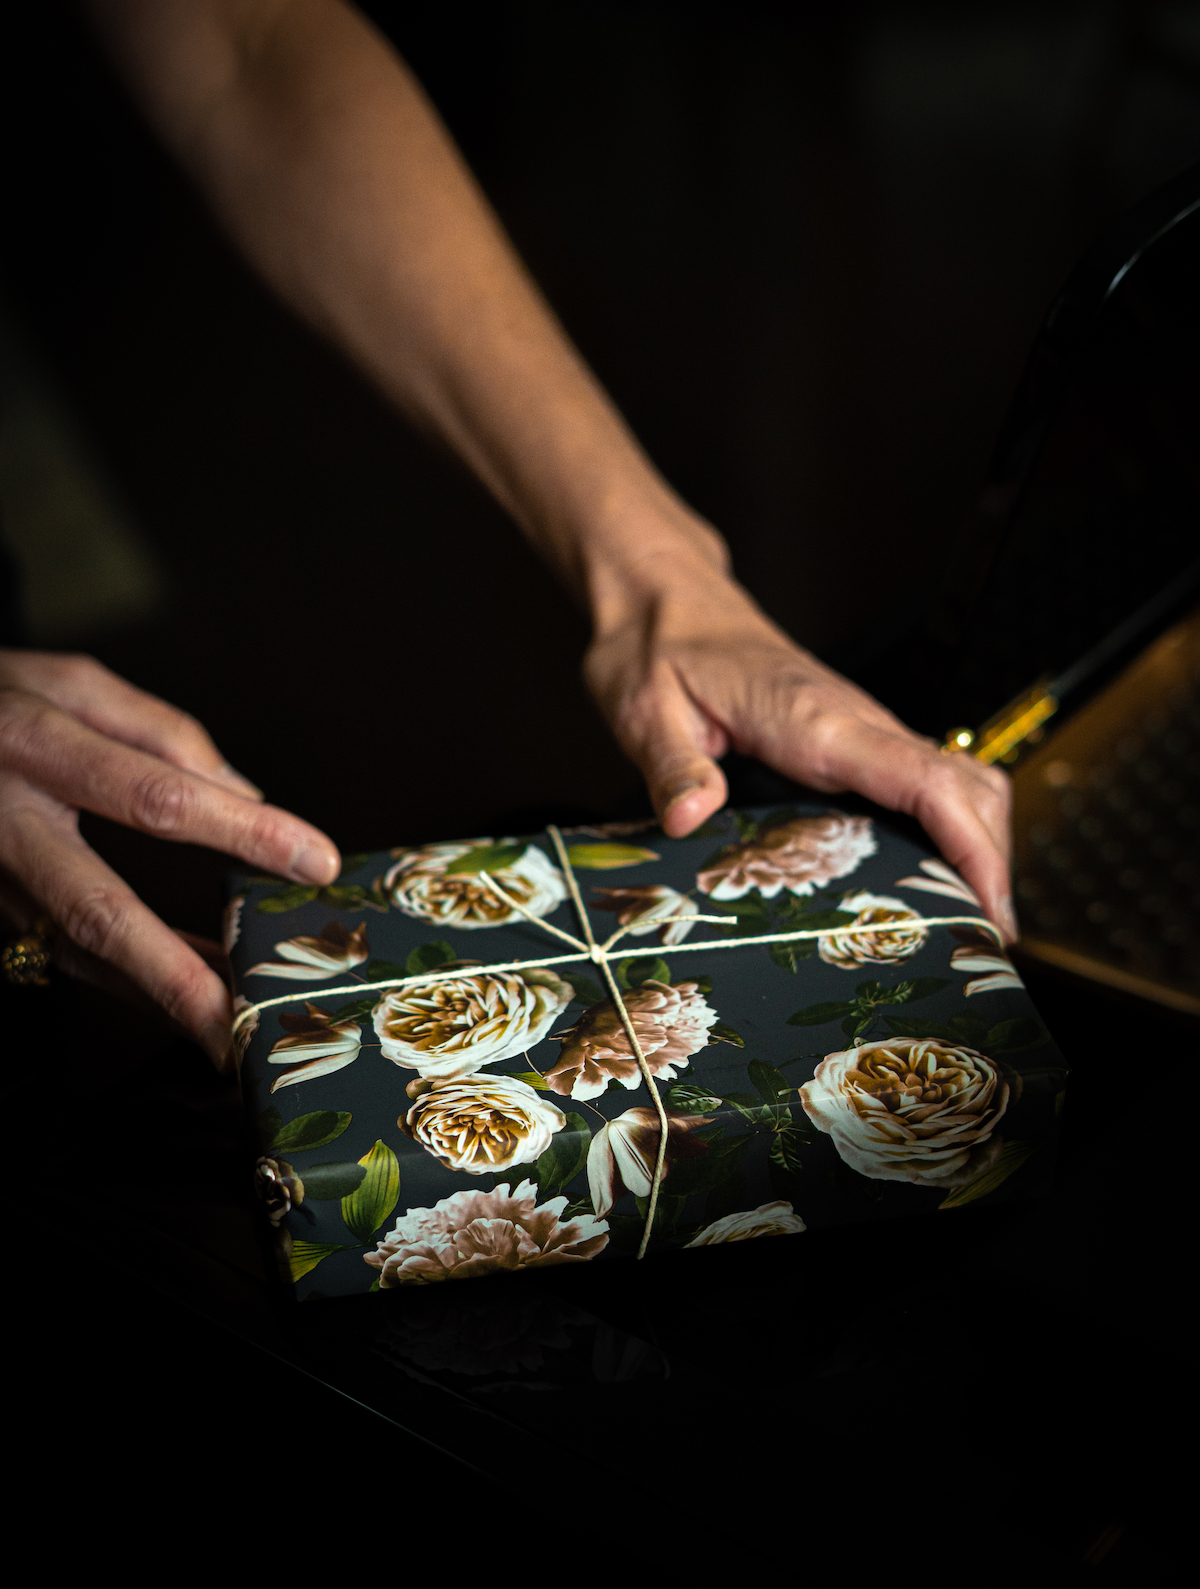 Hands setting down gift wrapped in floral wrapping paper and tied with string